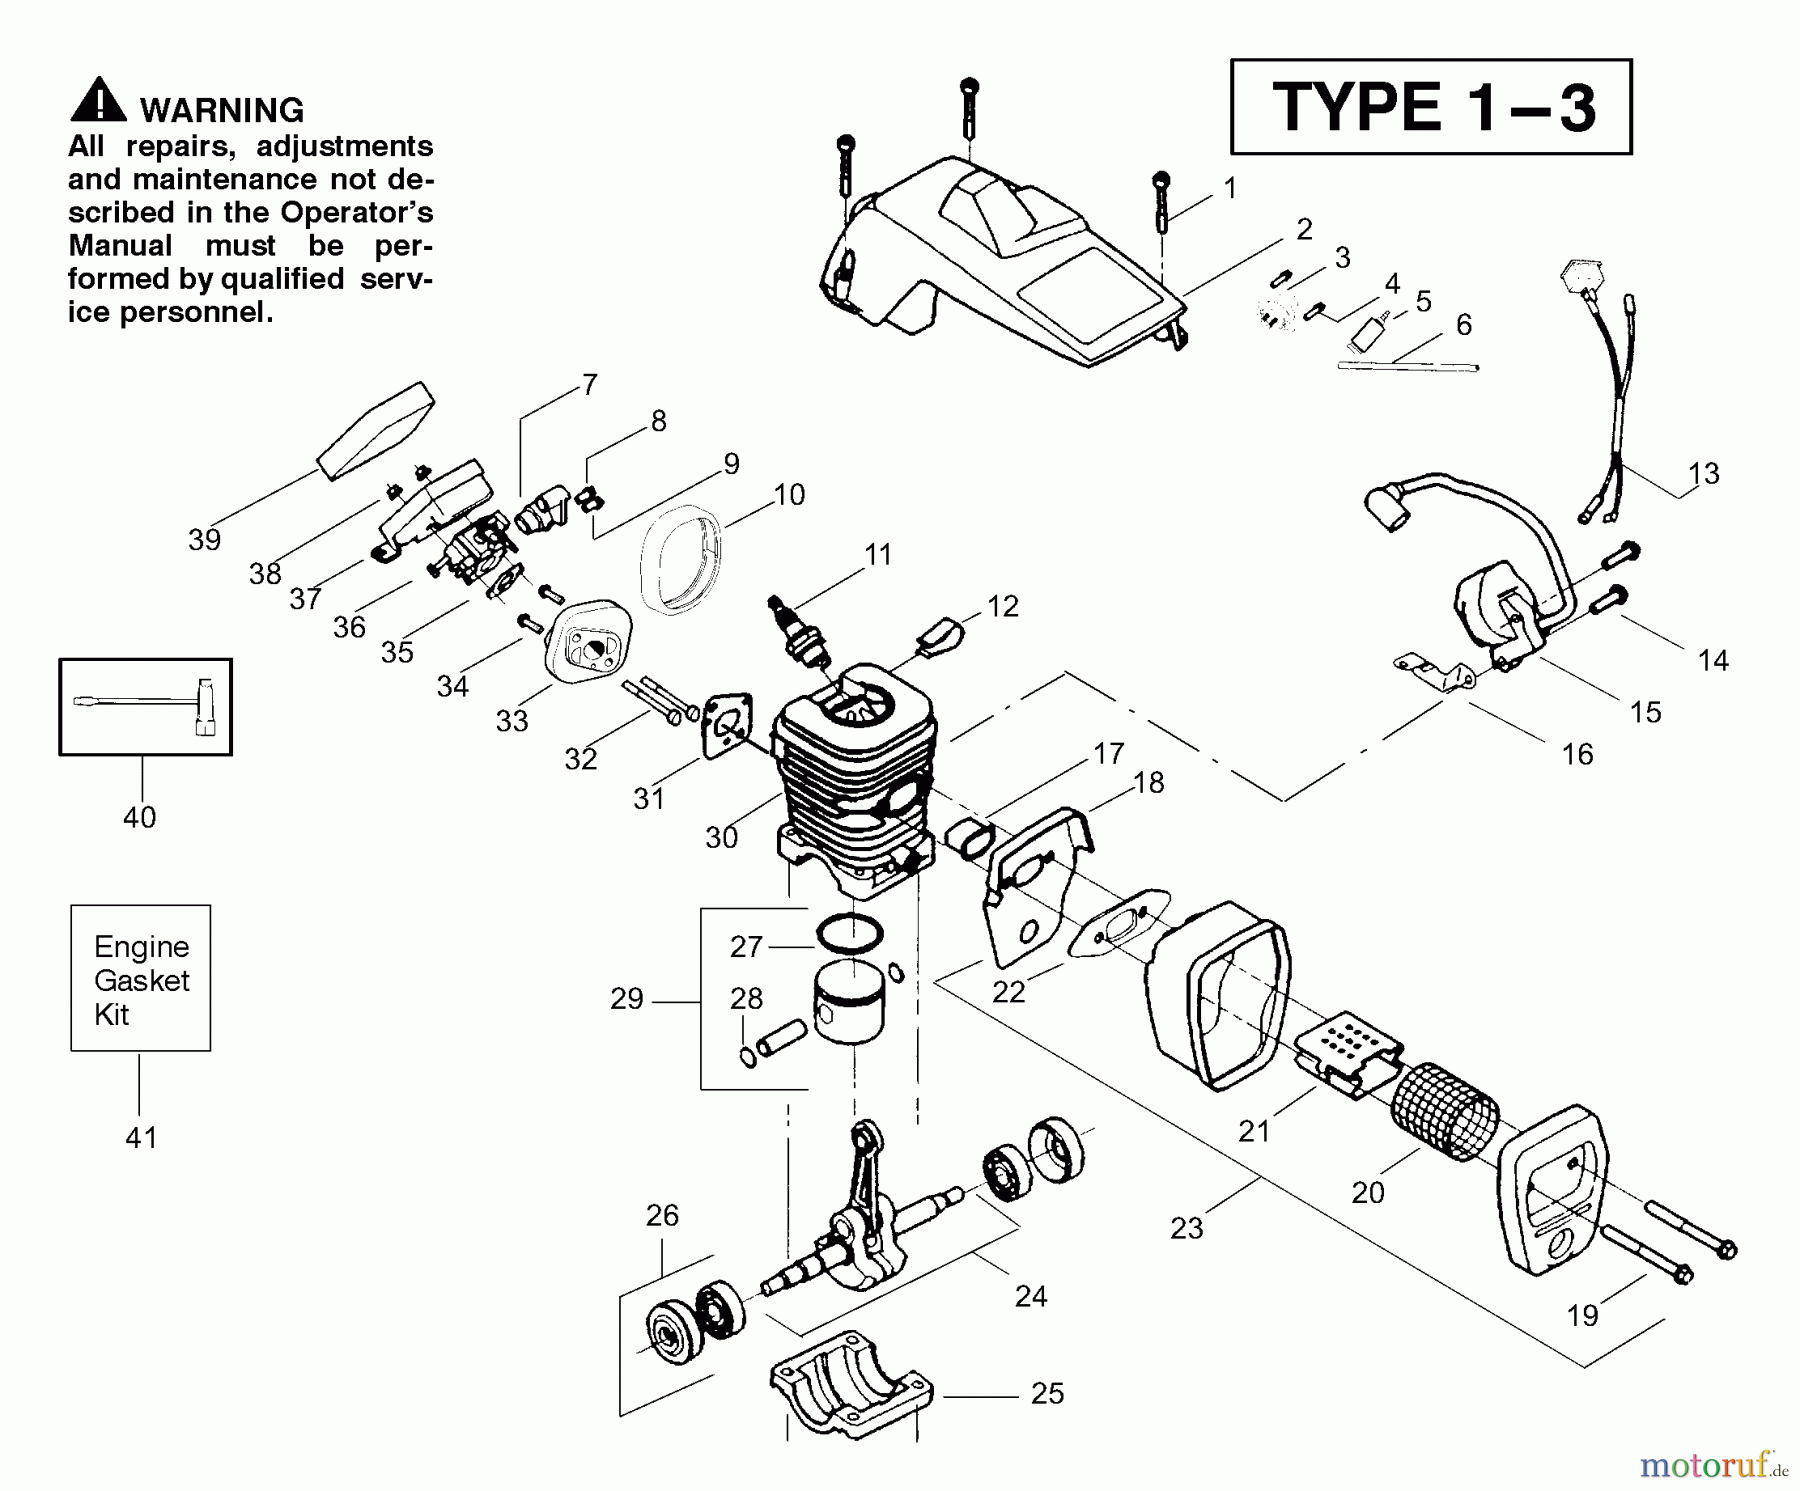  Poulan / Weed Eater Motorsägen PP221 (Type 1) - Poulan Pro Chainsaw Engine Assembly Type 1-3